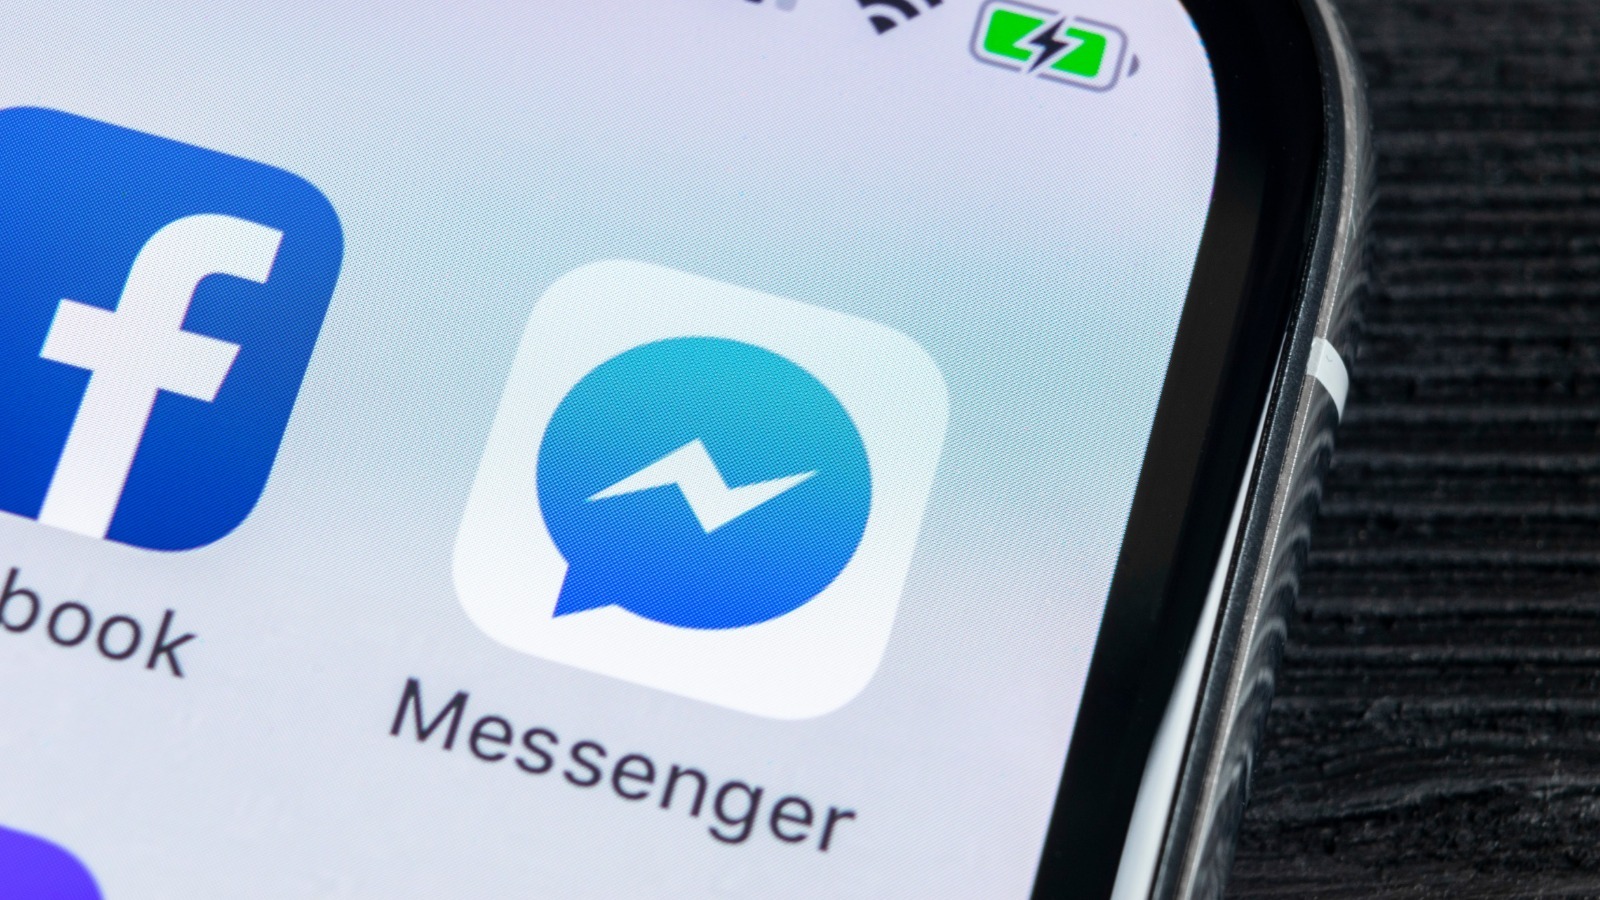 New Facebook Messenger Features Let You Ping Everyone Or Alert No One